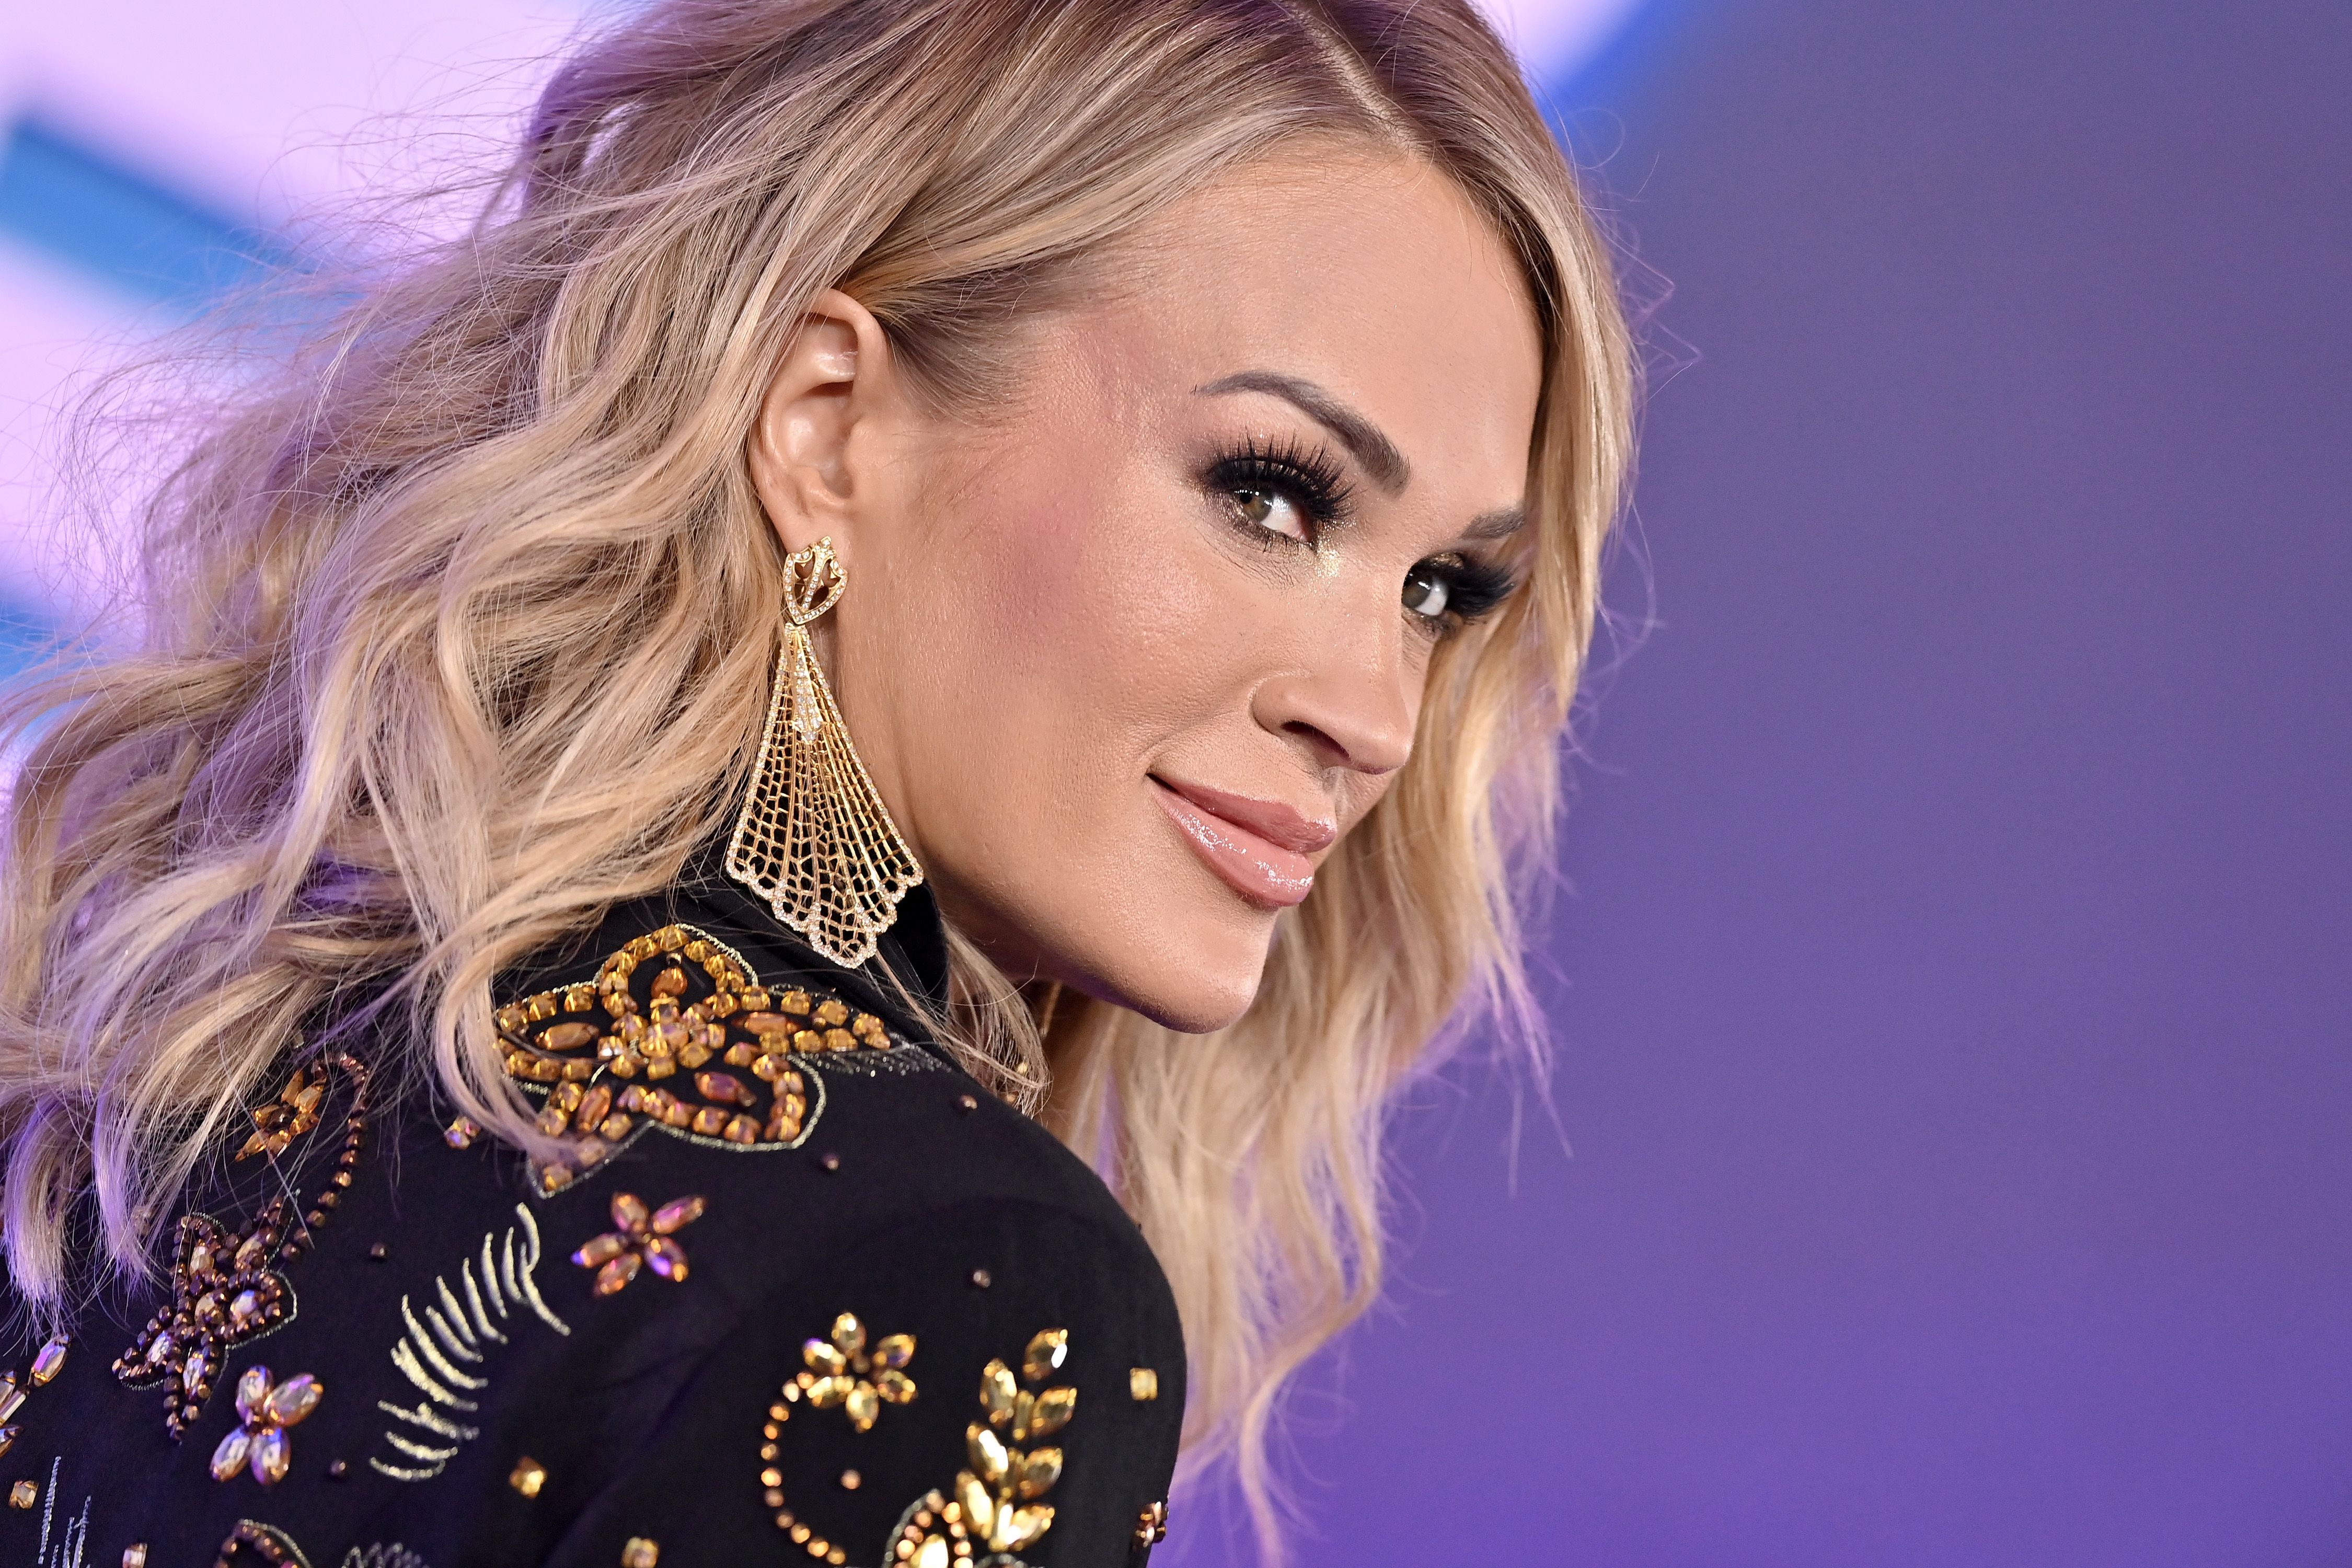 Carrie Underwood Ends Her Tour With a Huge Group Photo